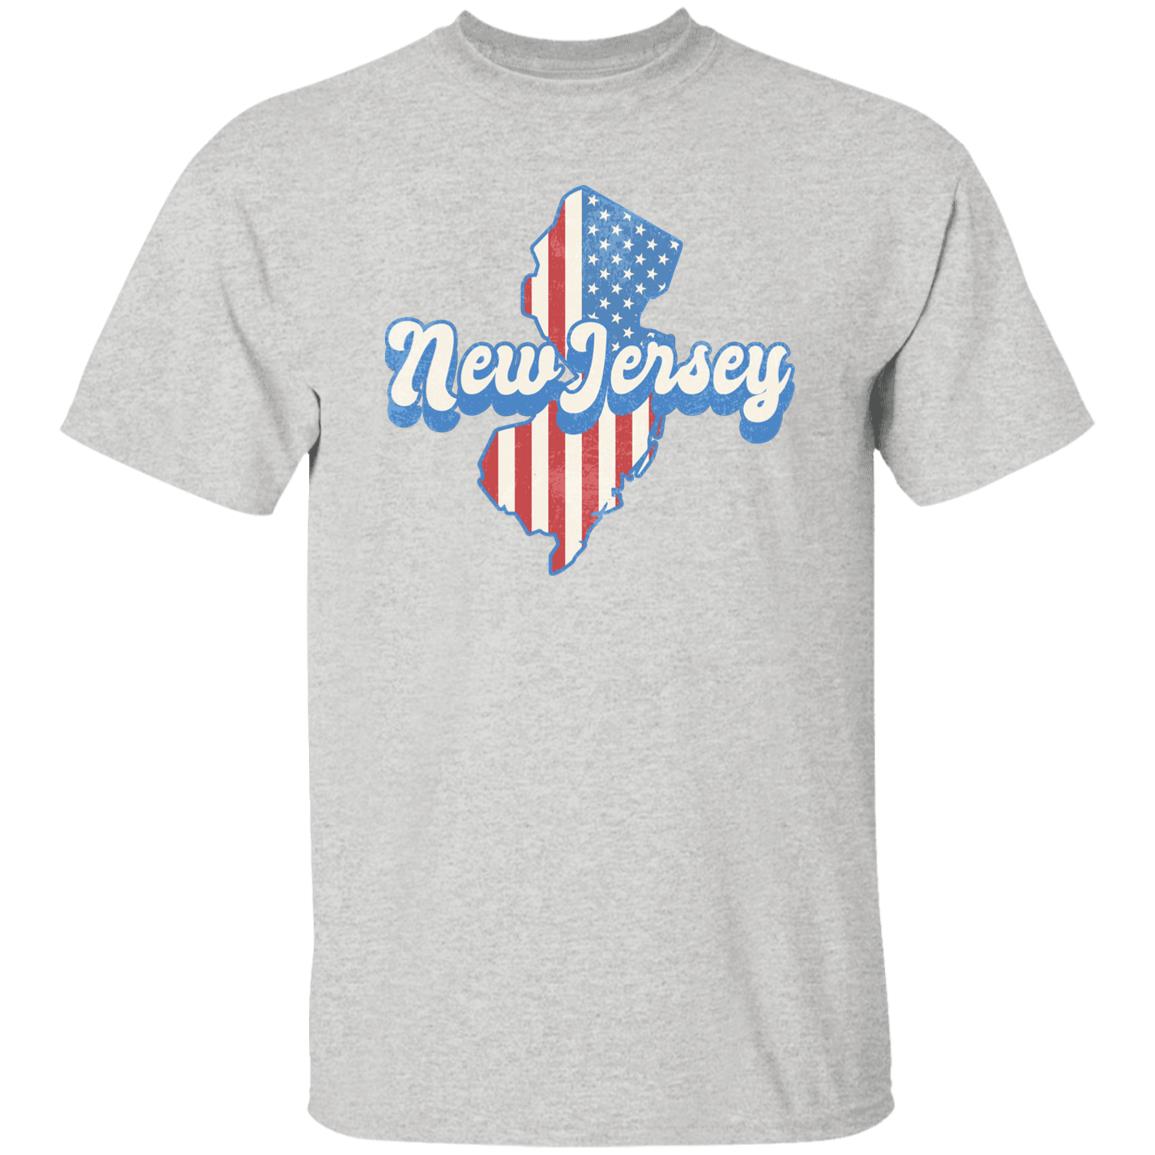 New Jersey US flag Unisex T-Shirt American patriotic NJ state tee White Ash Blue-Ash-Family-Gift-Planet